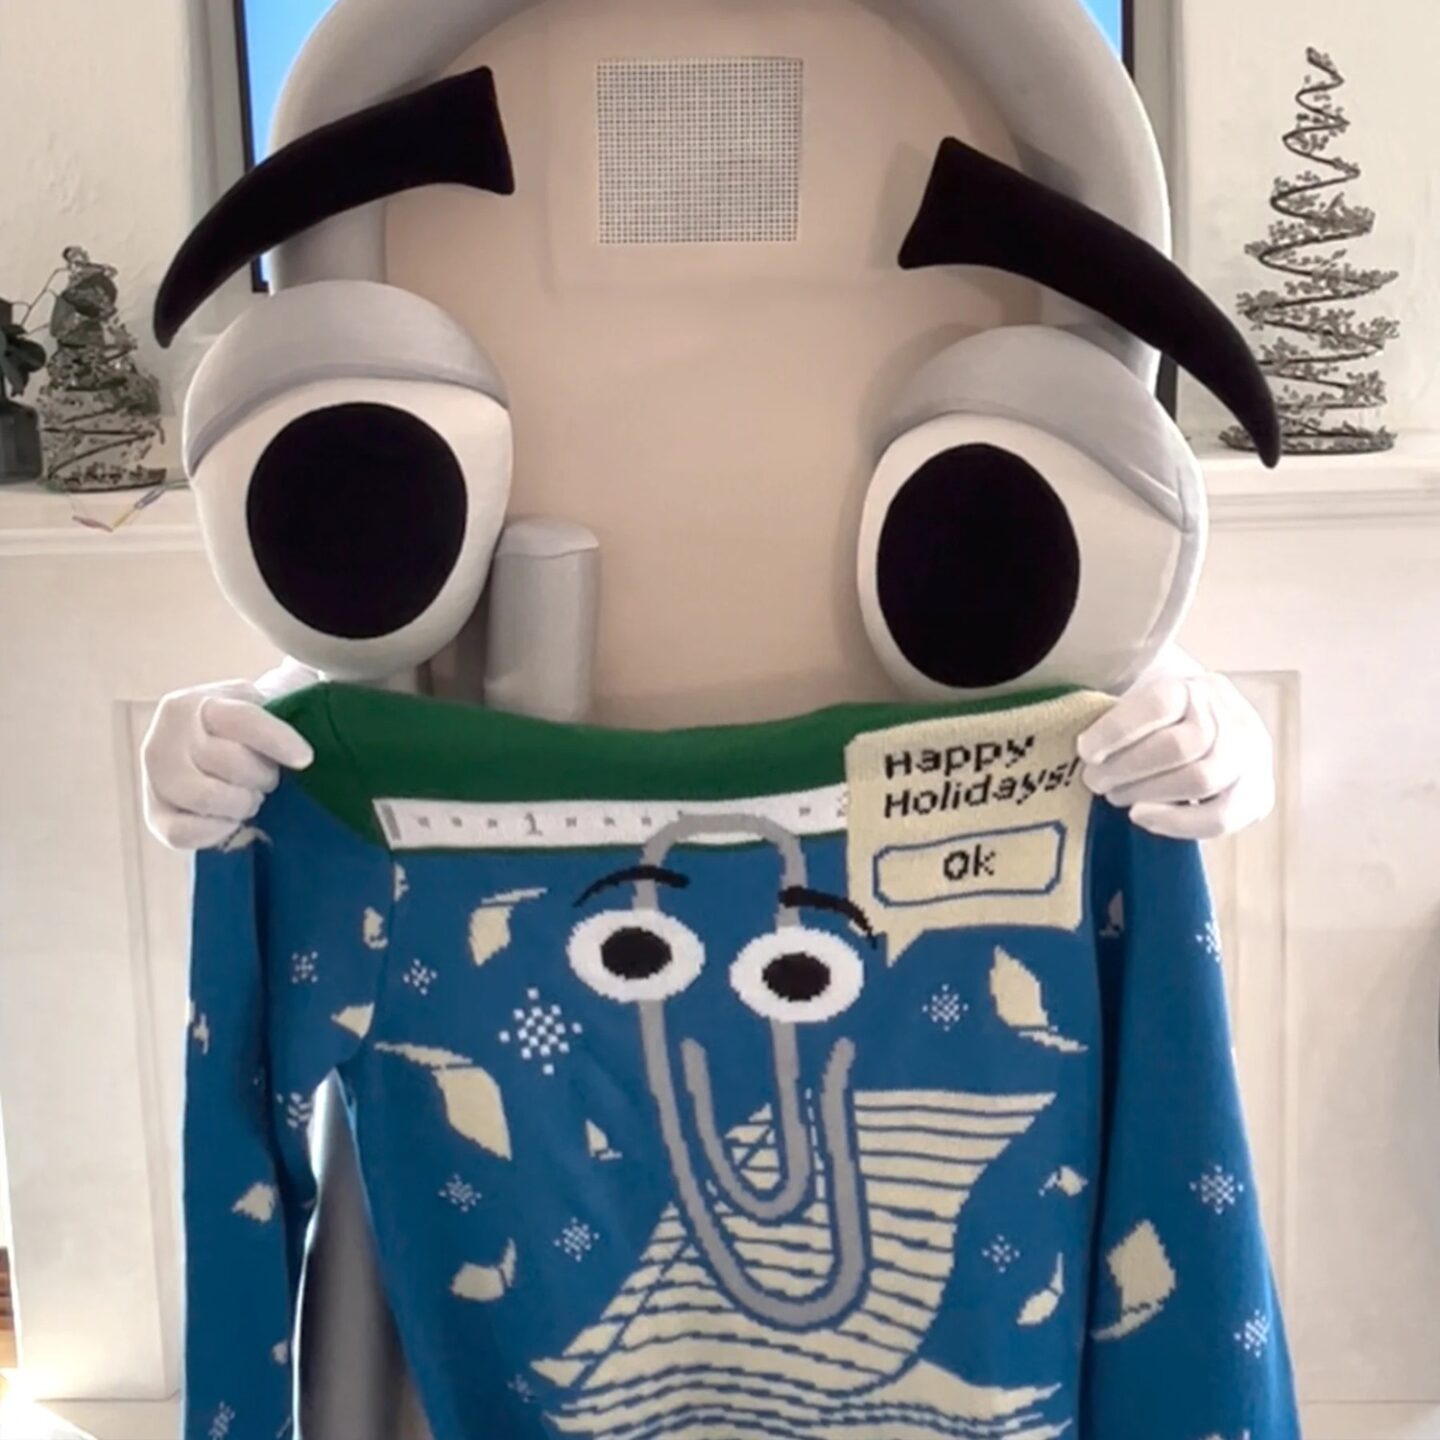 Another "ugly" Christmas sweater from Microsoft — this time based on Clippy